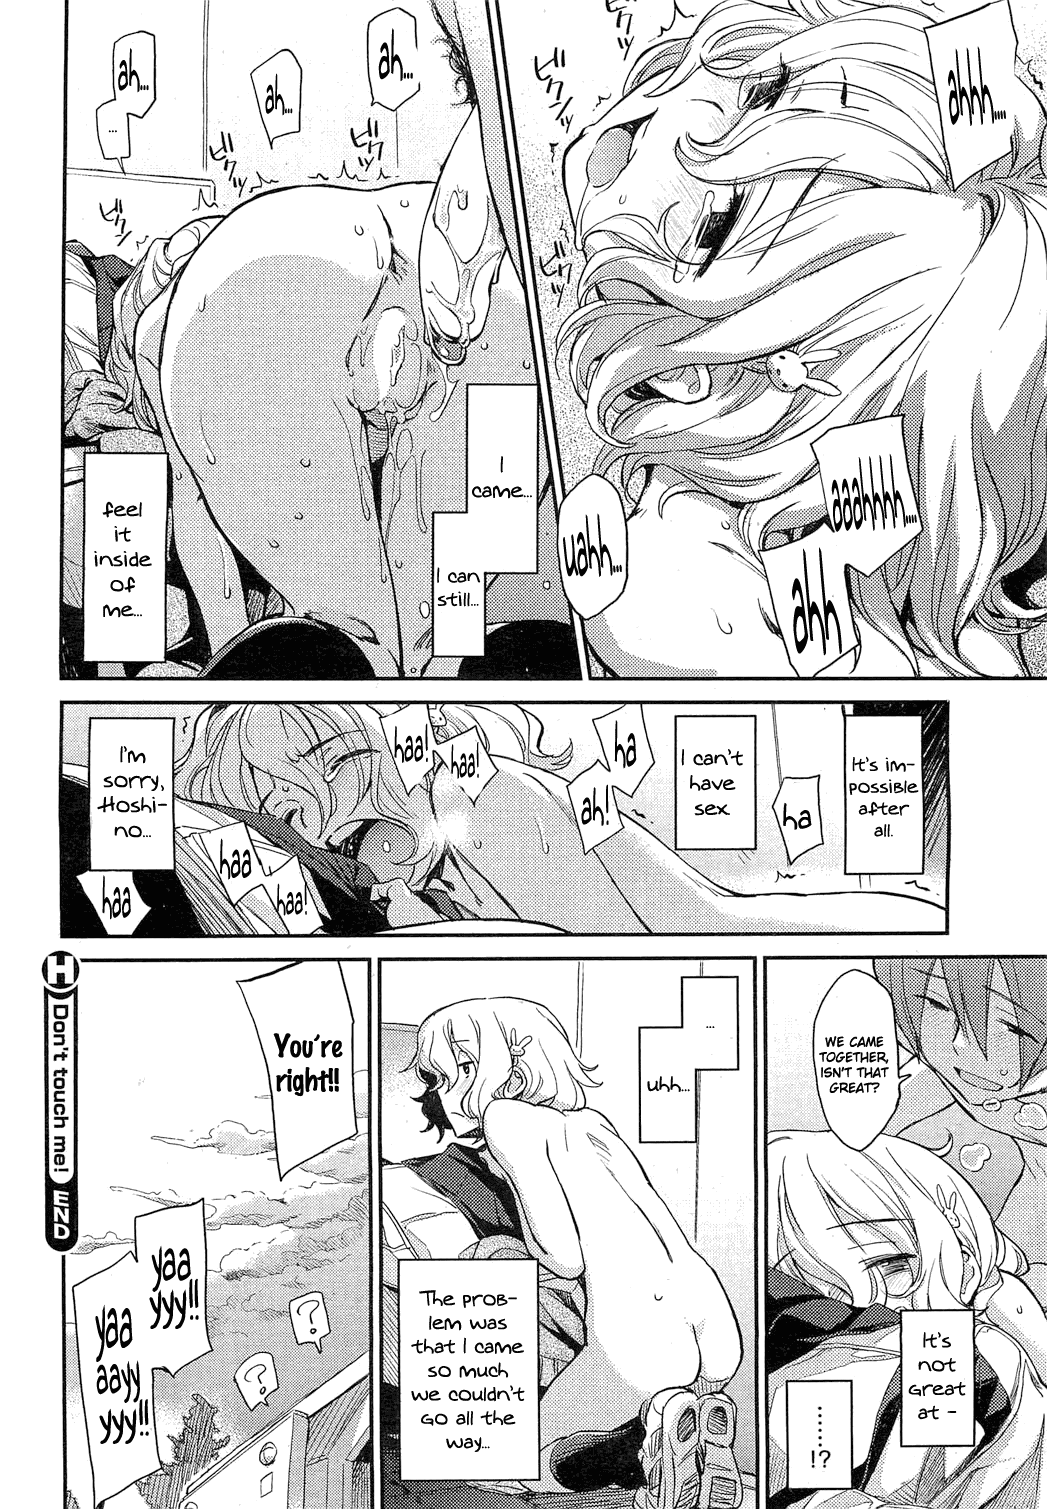 [Minato Fumi] Don't touch me! (COMIC HOTMiLK 2012-03) [English] [life4Kaoru] [三巷文] Don't touch me! (コミックホットミルク 2012年3月号) [英訳]